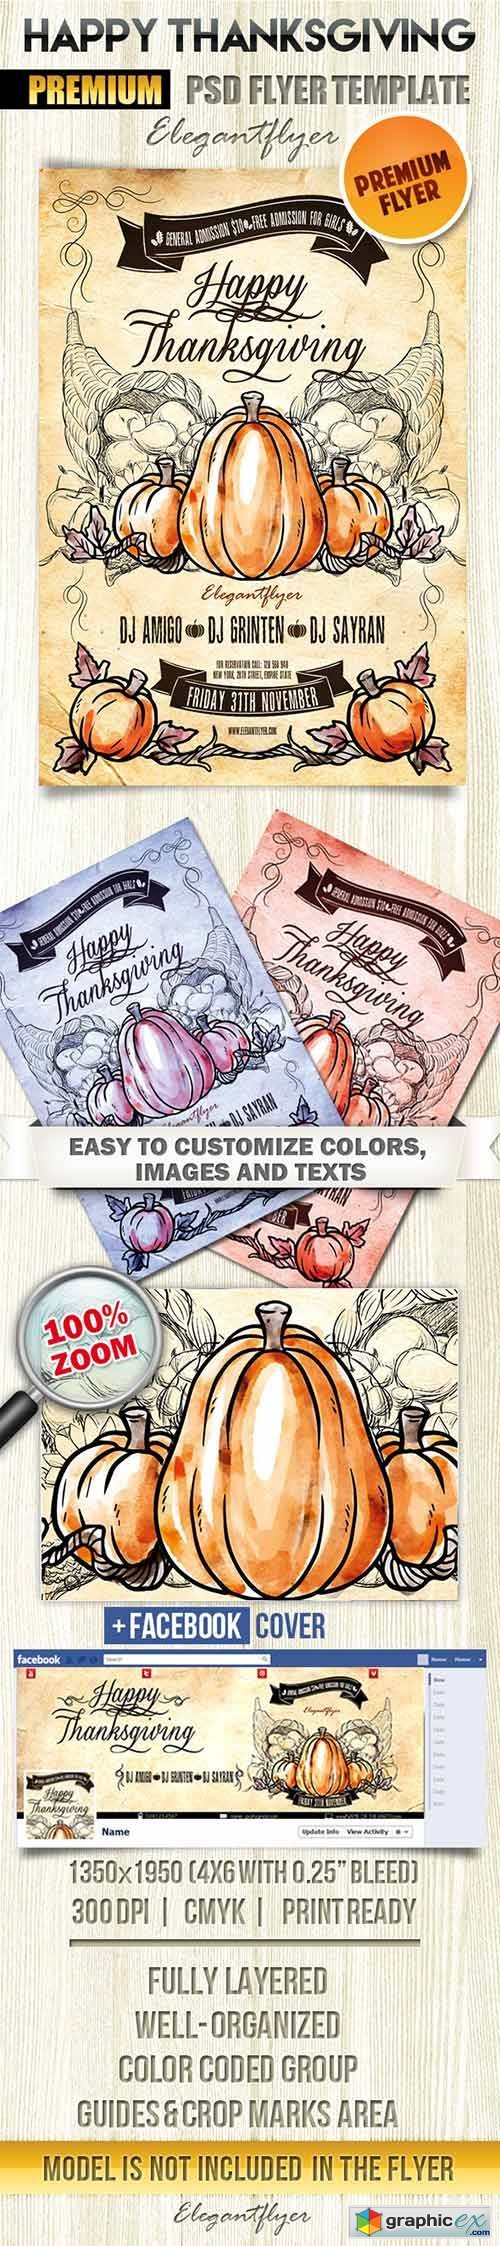 Happy Thanksgiving Flyer PSD Template + Facebook Cover